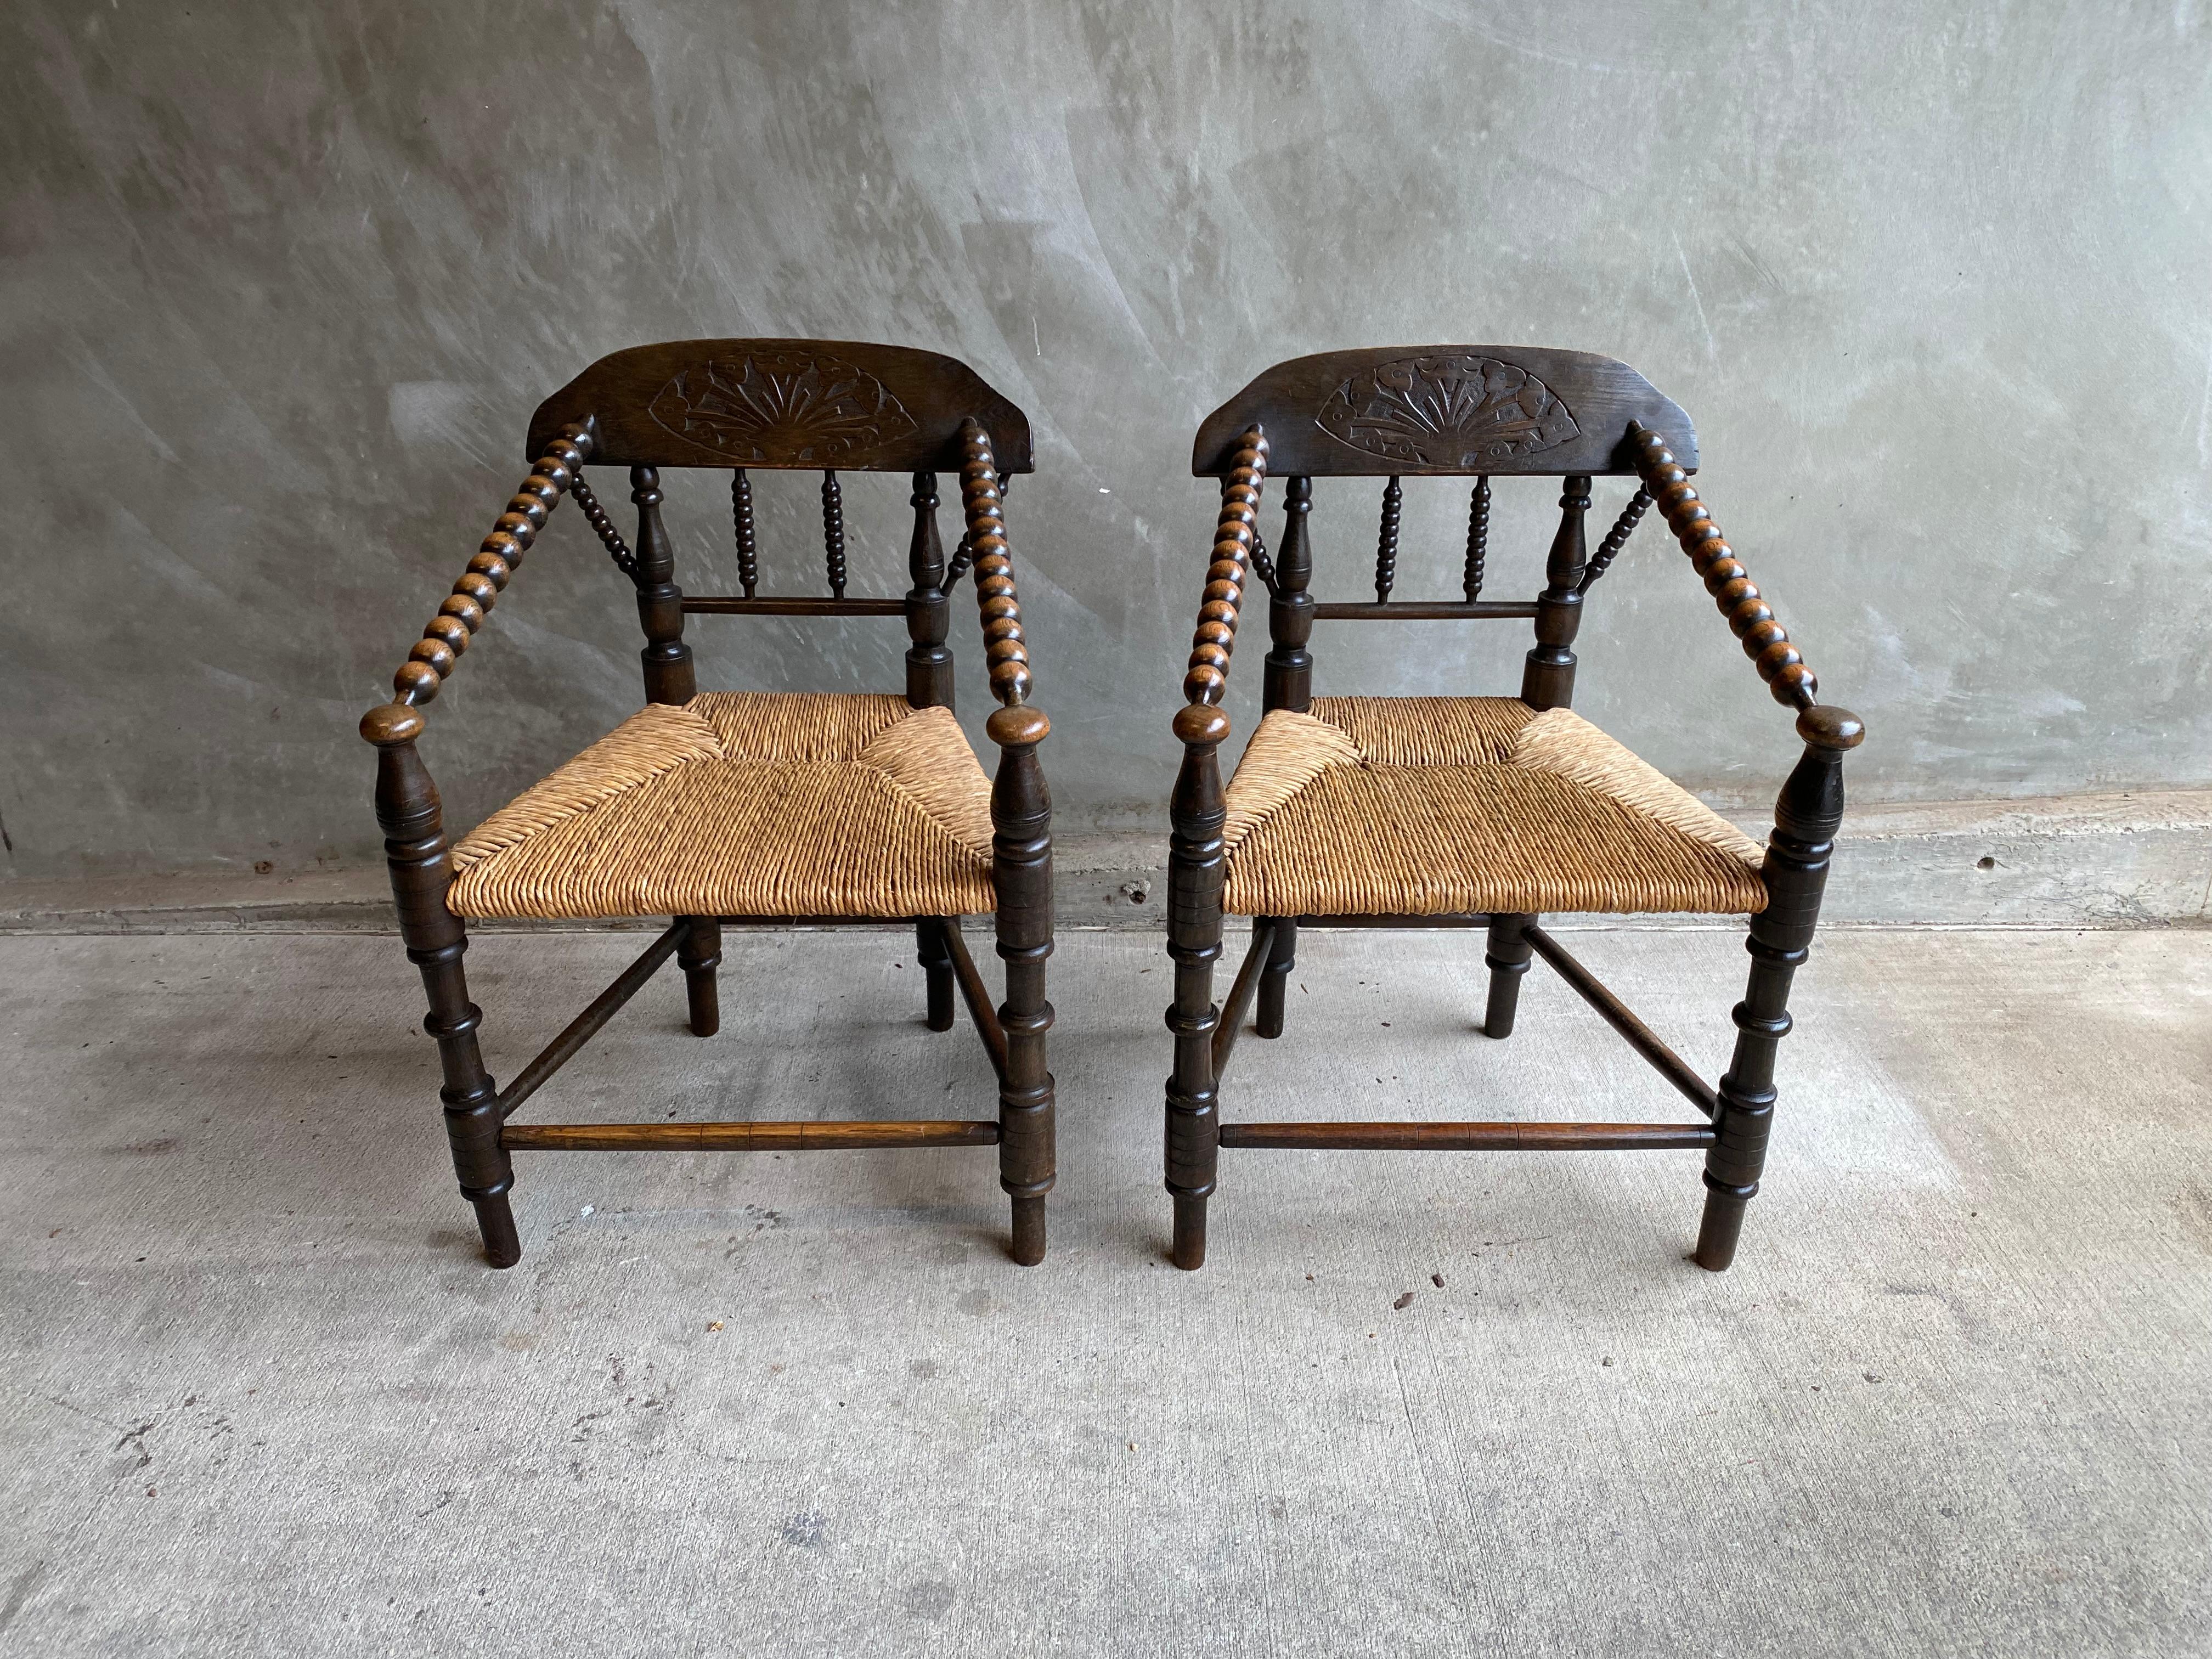 Pair of chairs in English bobbin style with rush seats and dark stain over oak. Matching settee also available. See listing LU1140228508482 for matching 19th century bobbin settee.